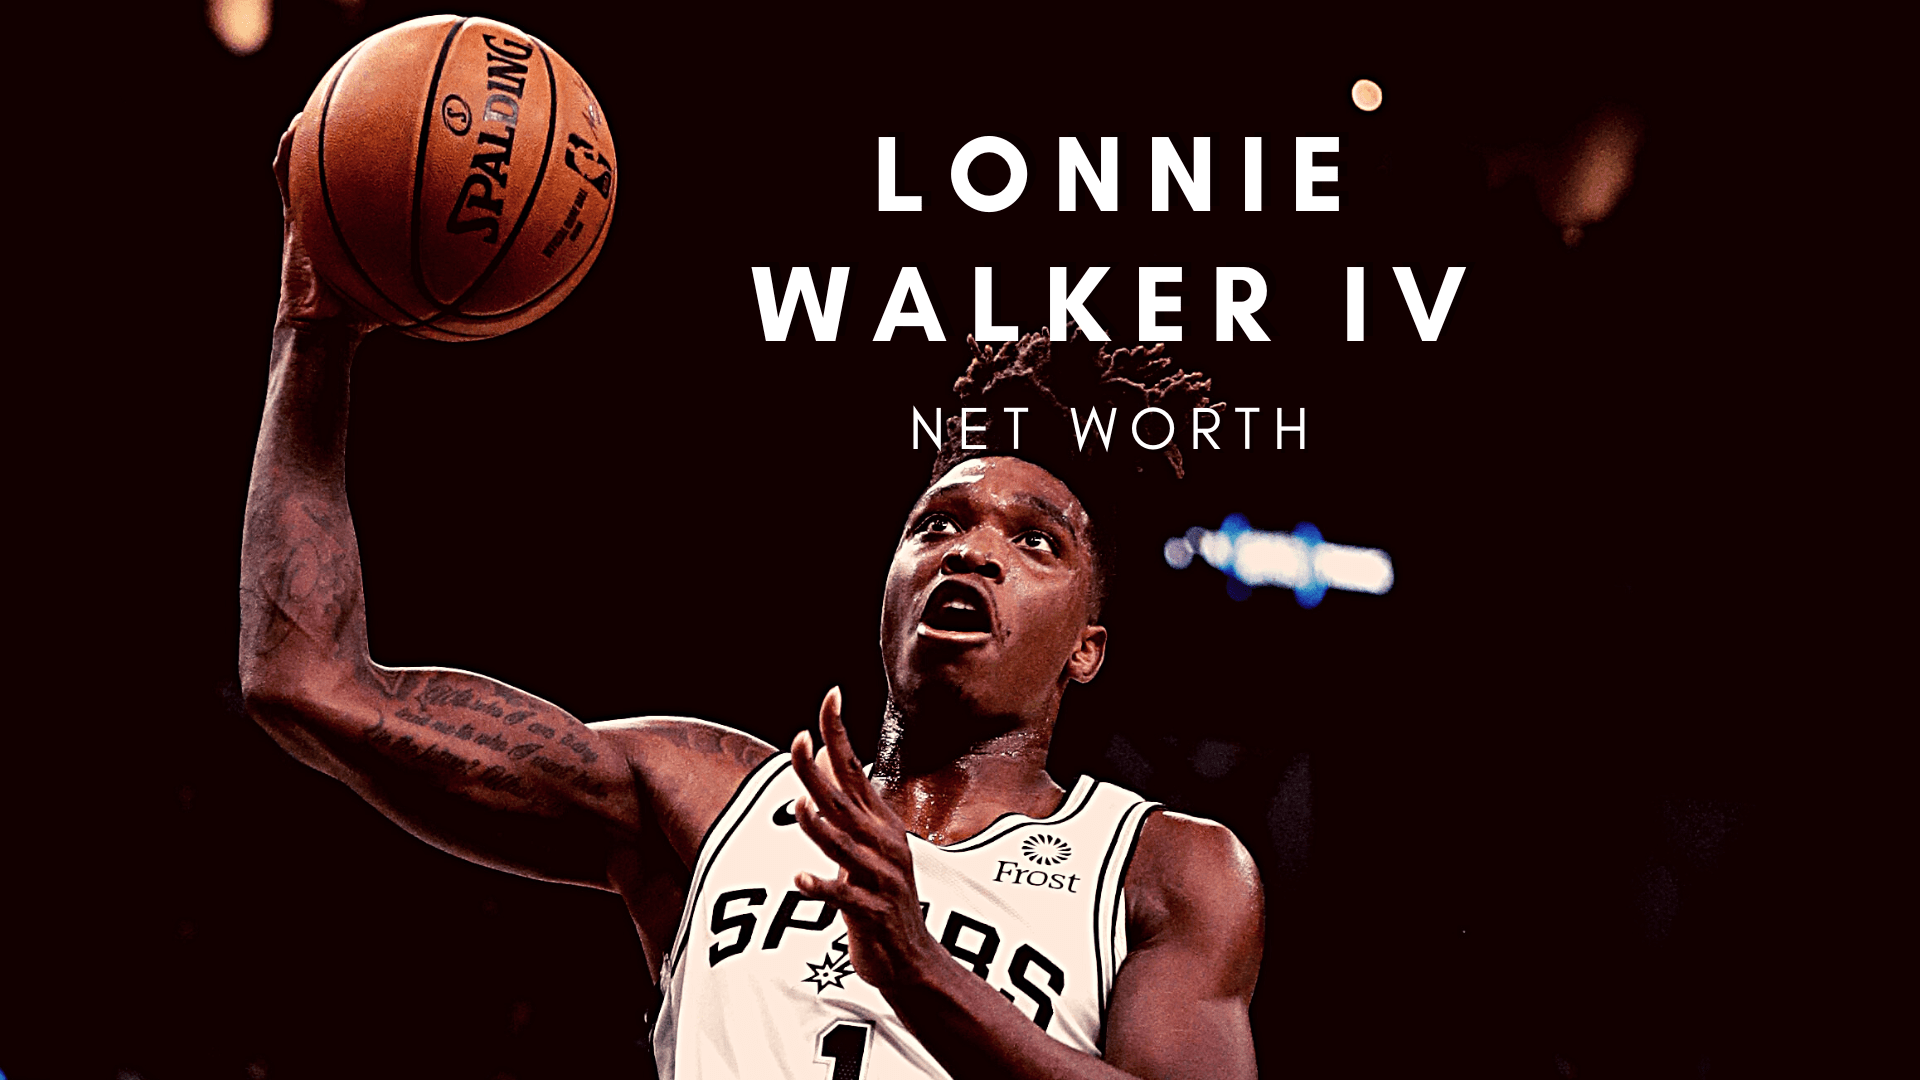 Lonnie Walker IV 2022 Net Worth, Salary, Achievements, Records, and